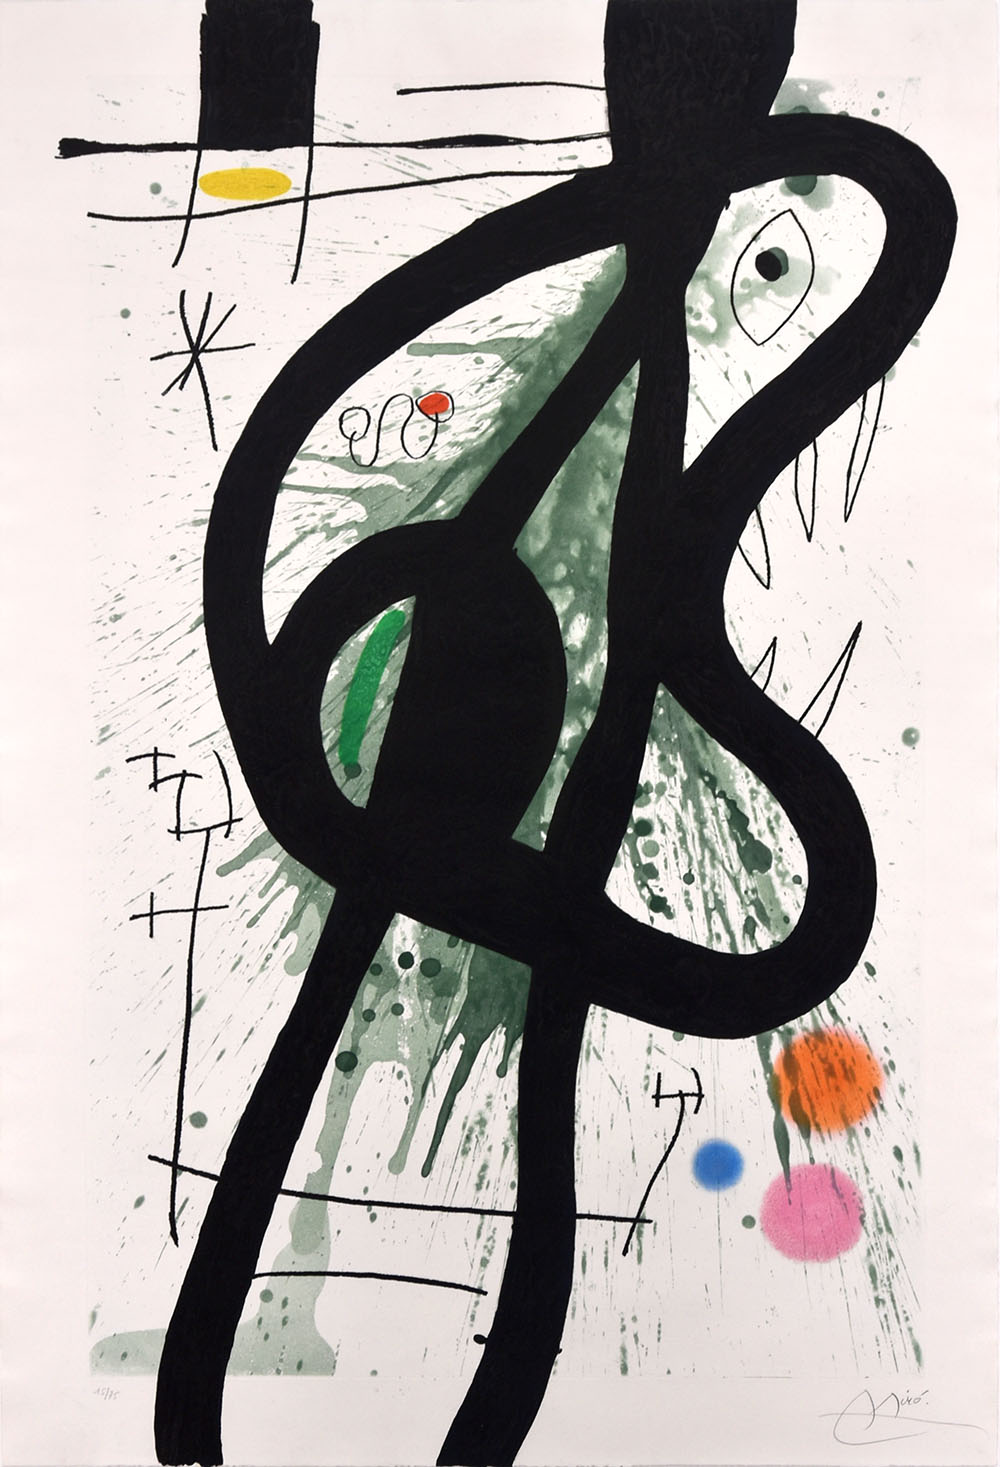 Joan Miró, Le Grand Carnassier (The Large Carnivore) 1969